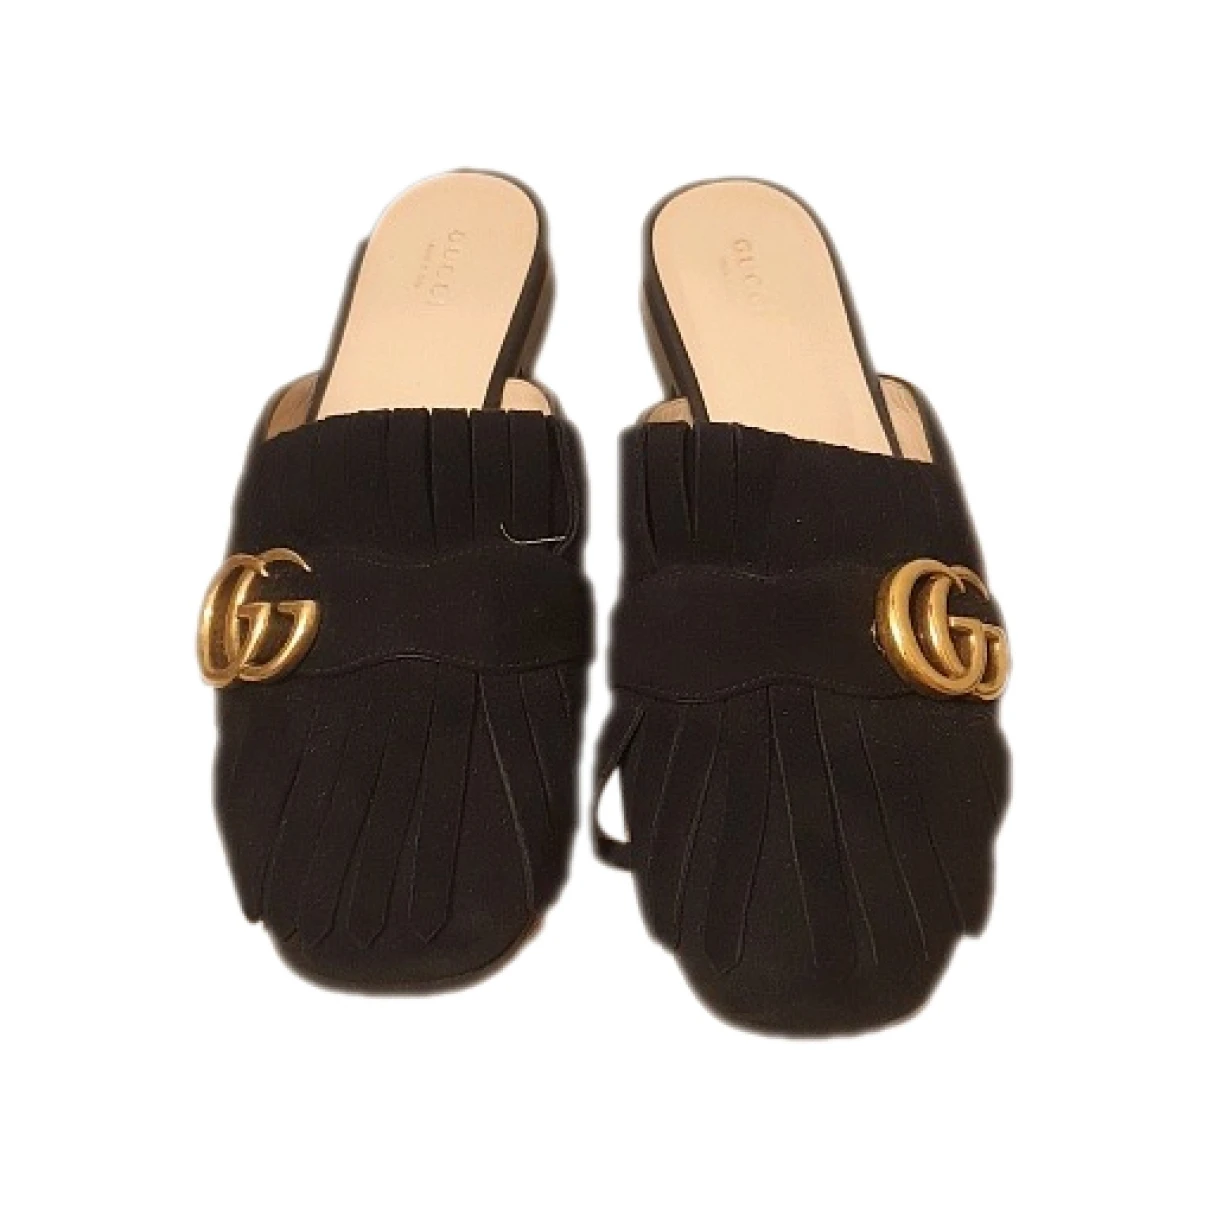 shoes Gucci mules & clogs for Female Suede 38 EU. Used condition